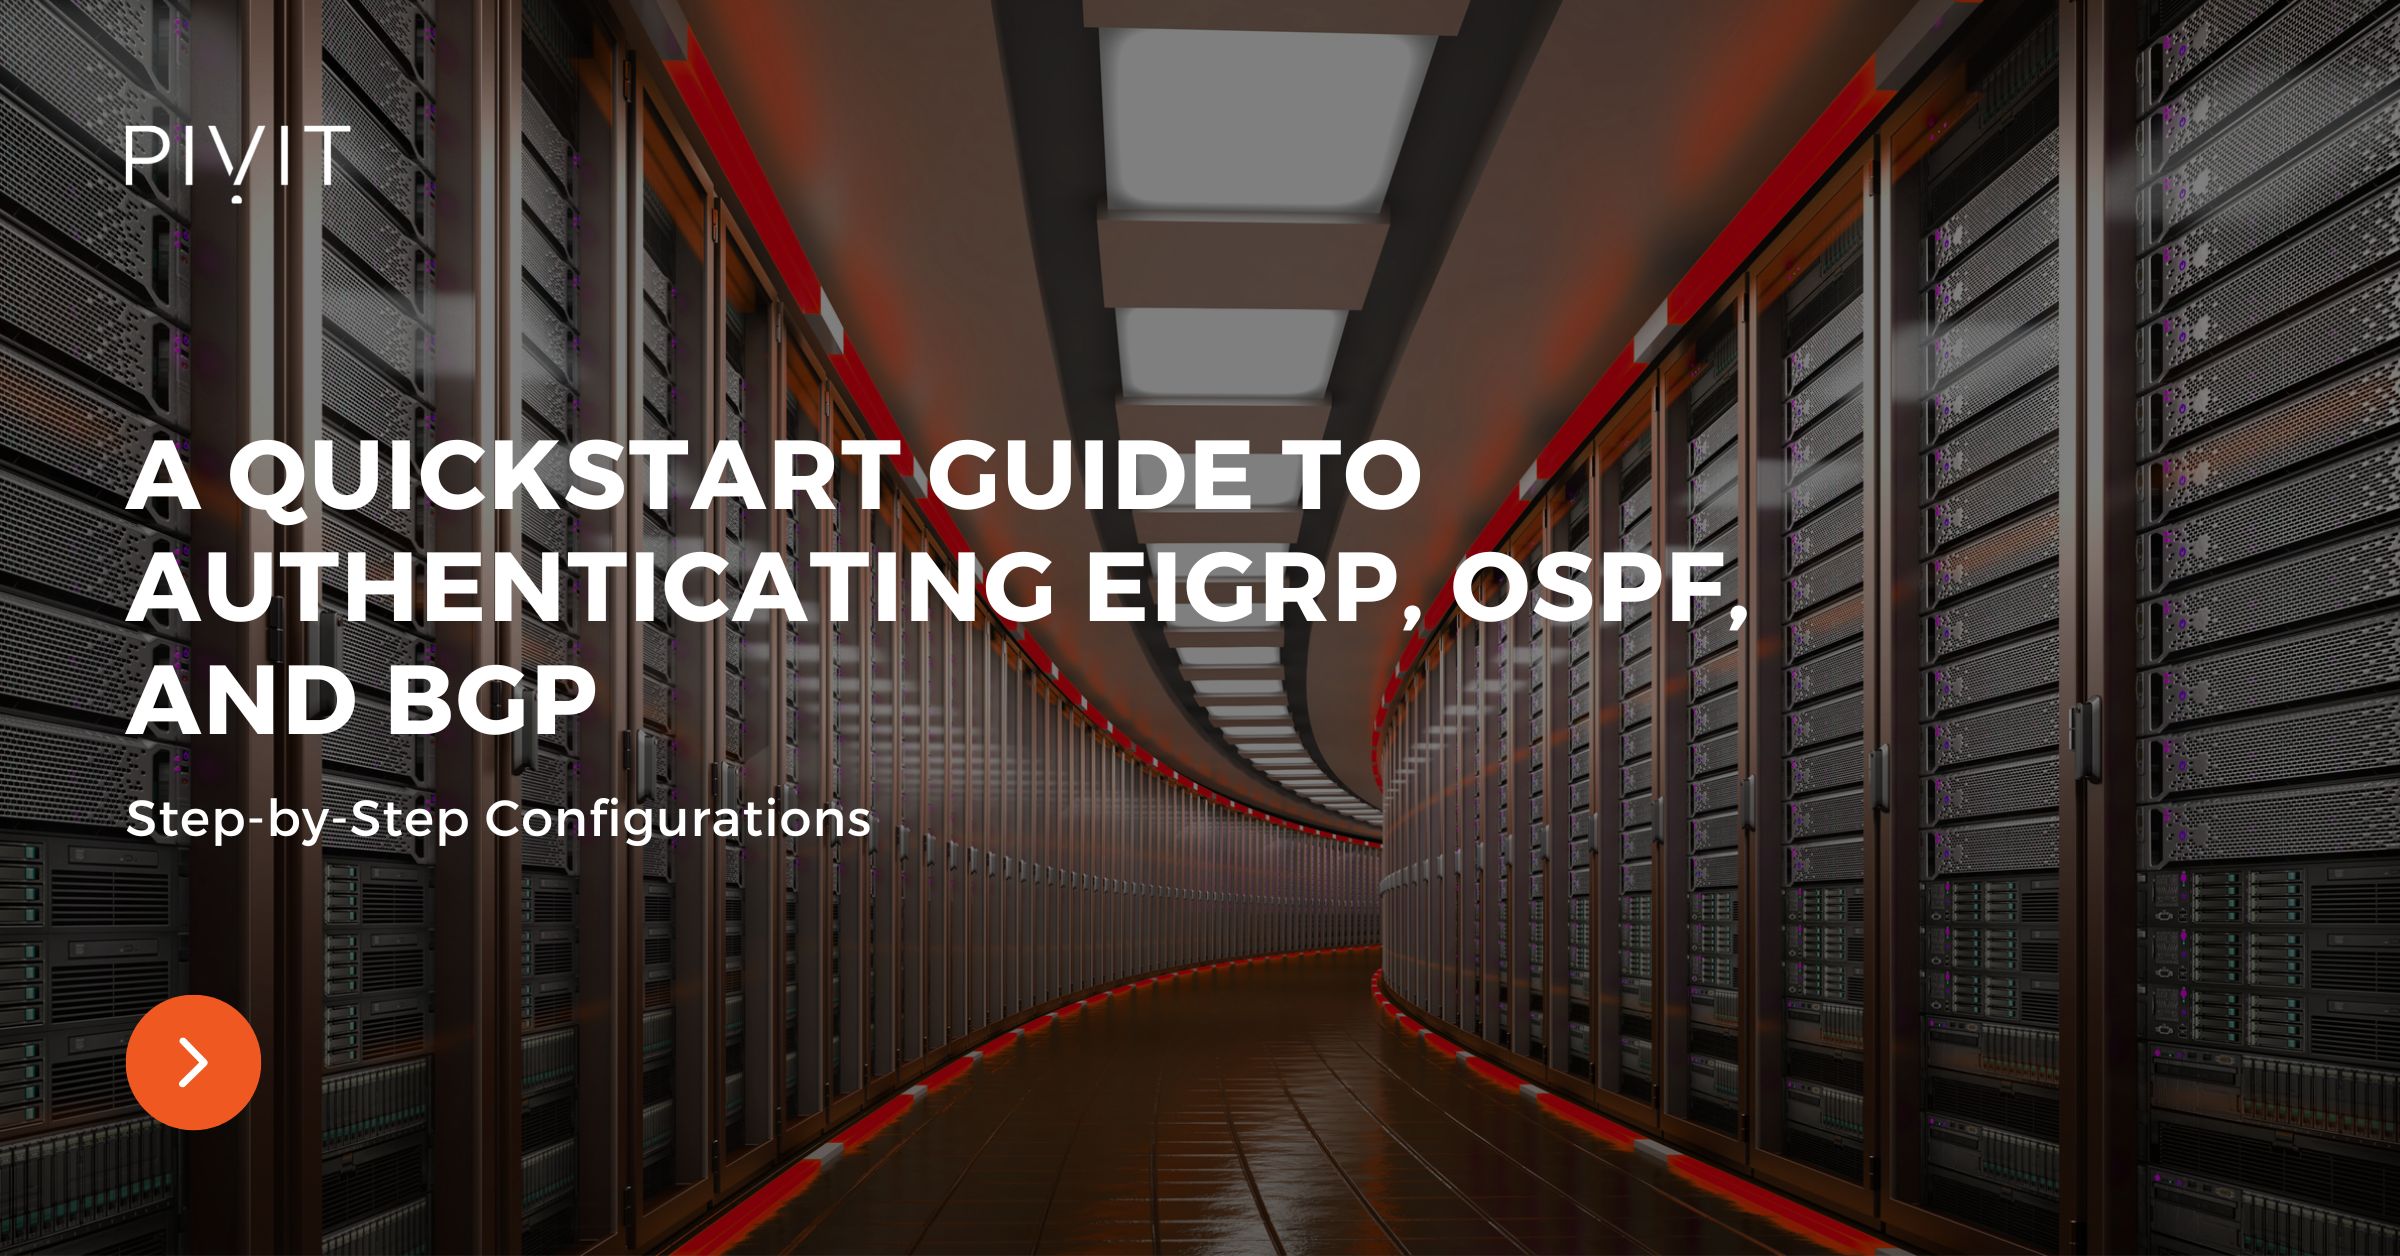 A QuickStart Guide to Authenticating EIGRP, OSPF, and BGP - Step-by-Step Configurations